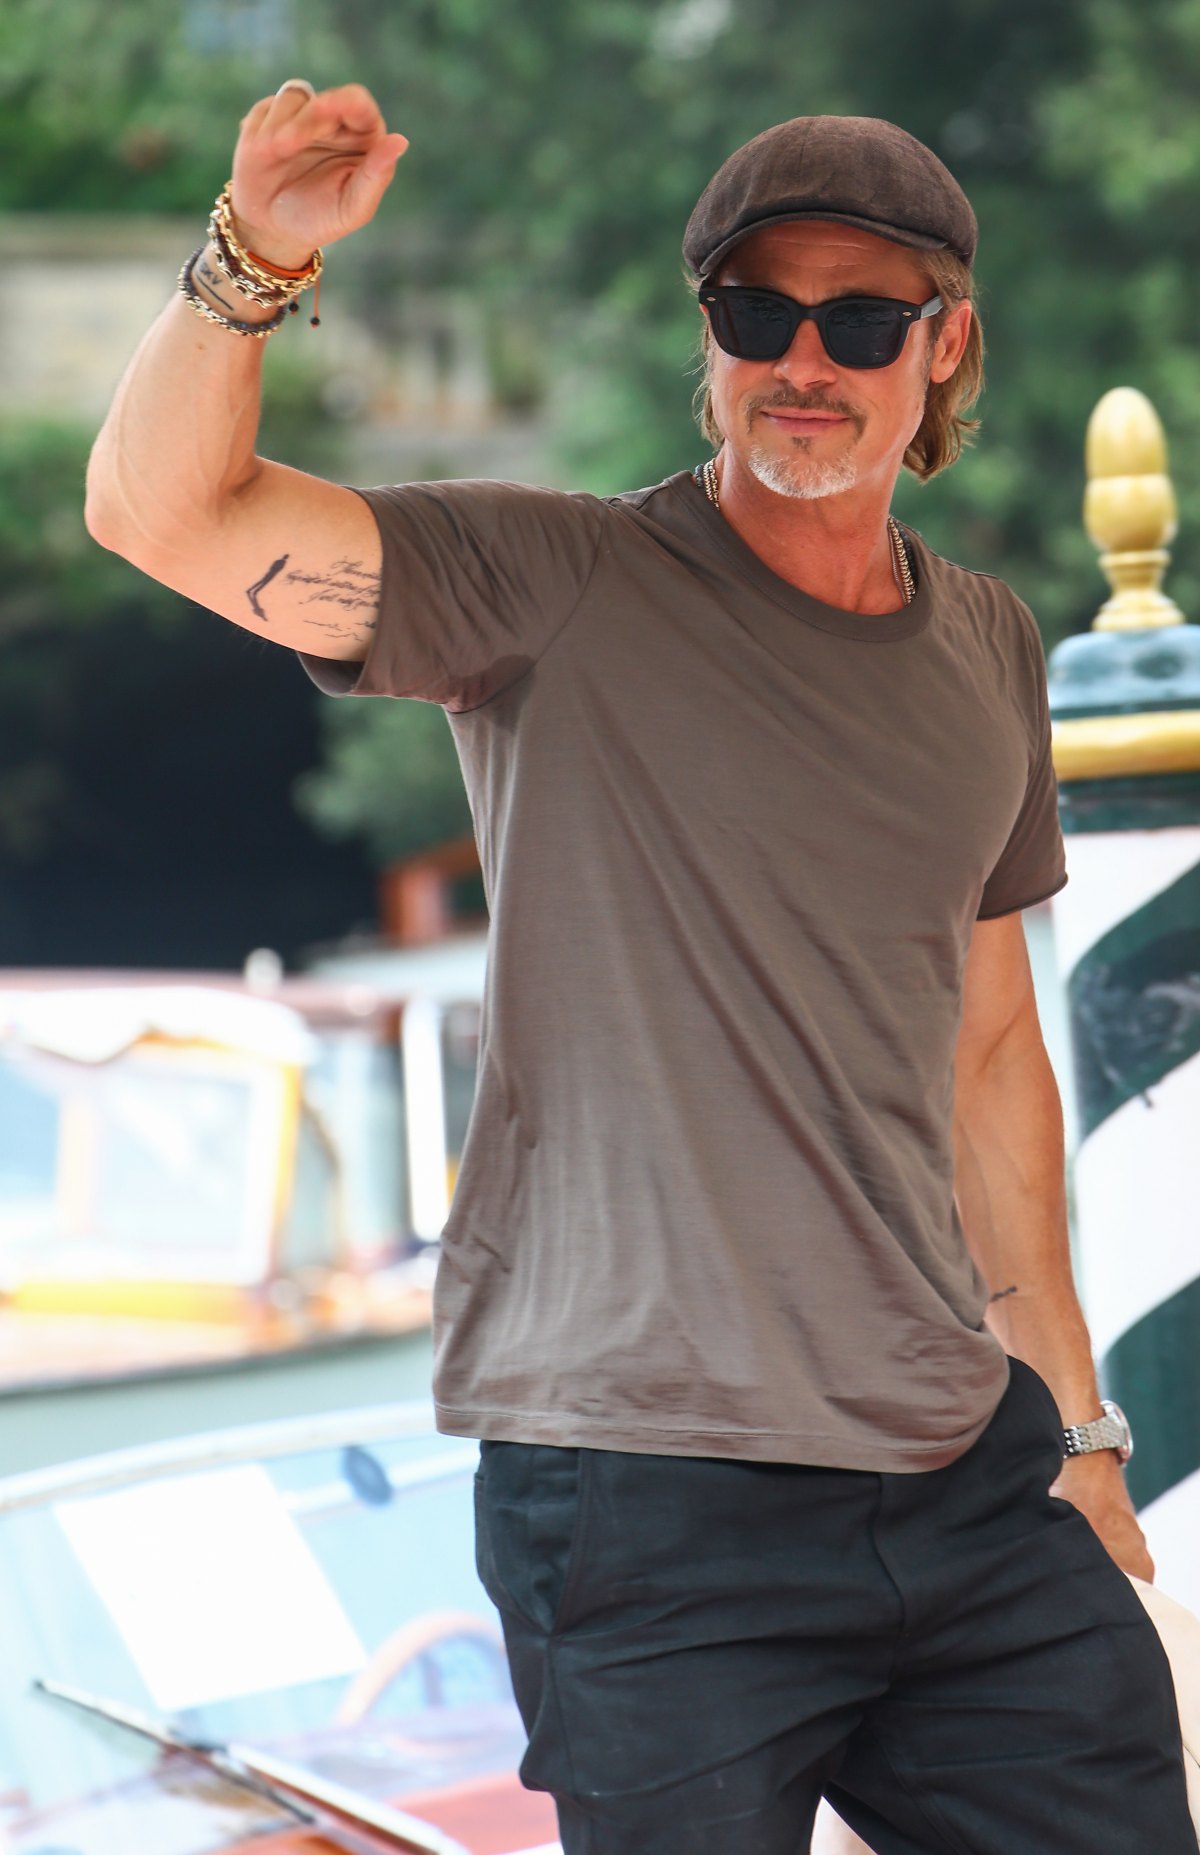 Brad Pitt Tattoo Collection: His Ink Photos, Meanings of Tattoos